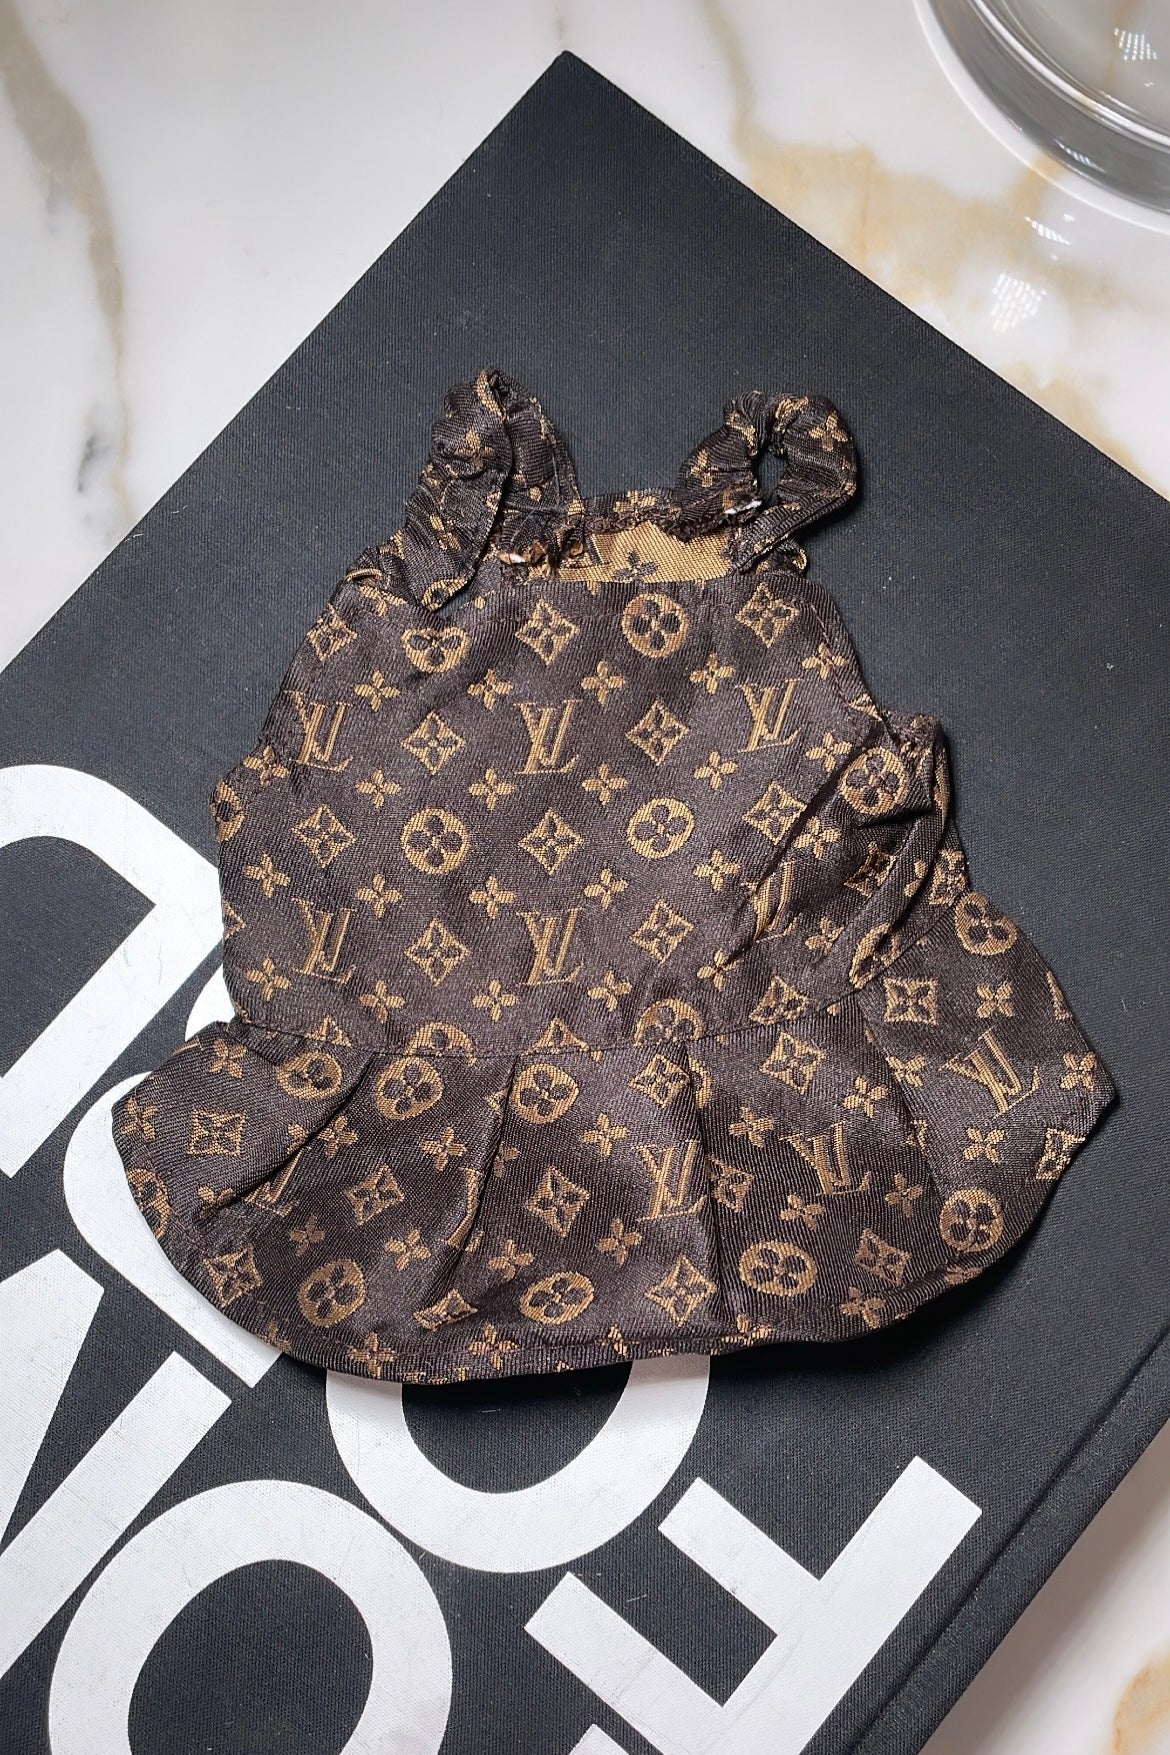 Furry Vuitton Dress – The Pawster